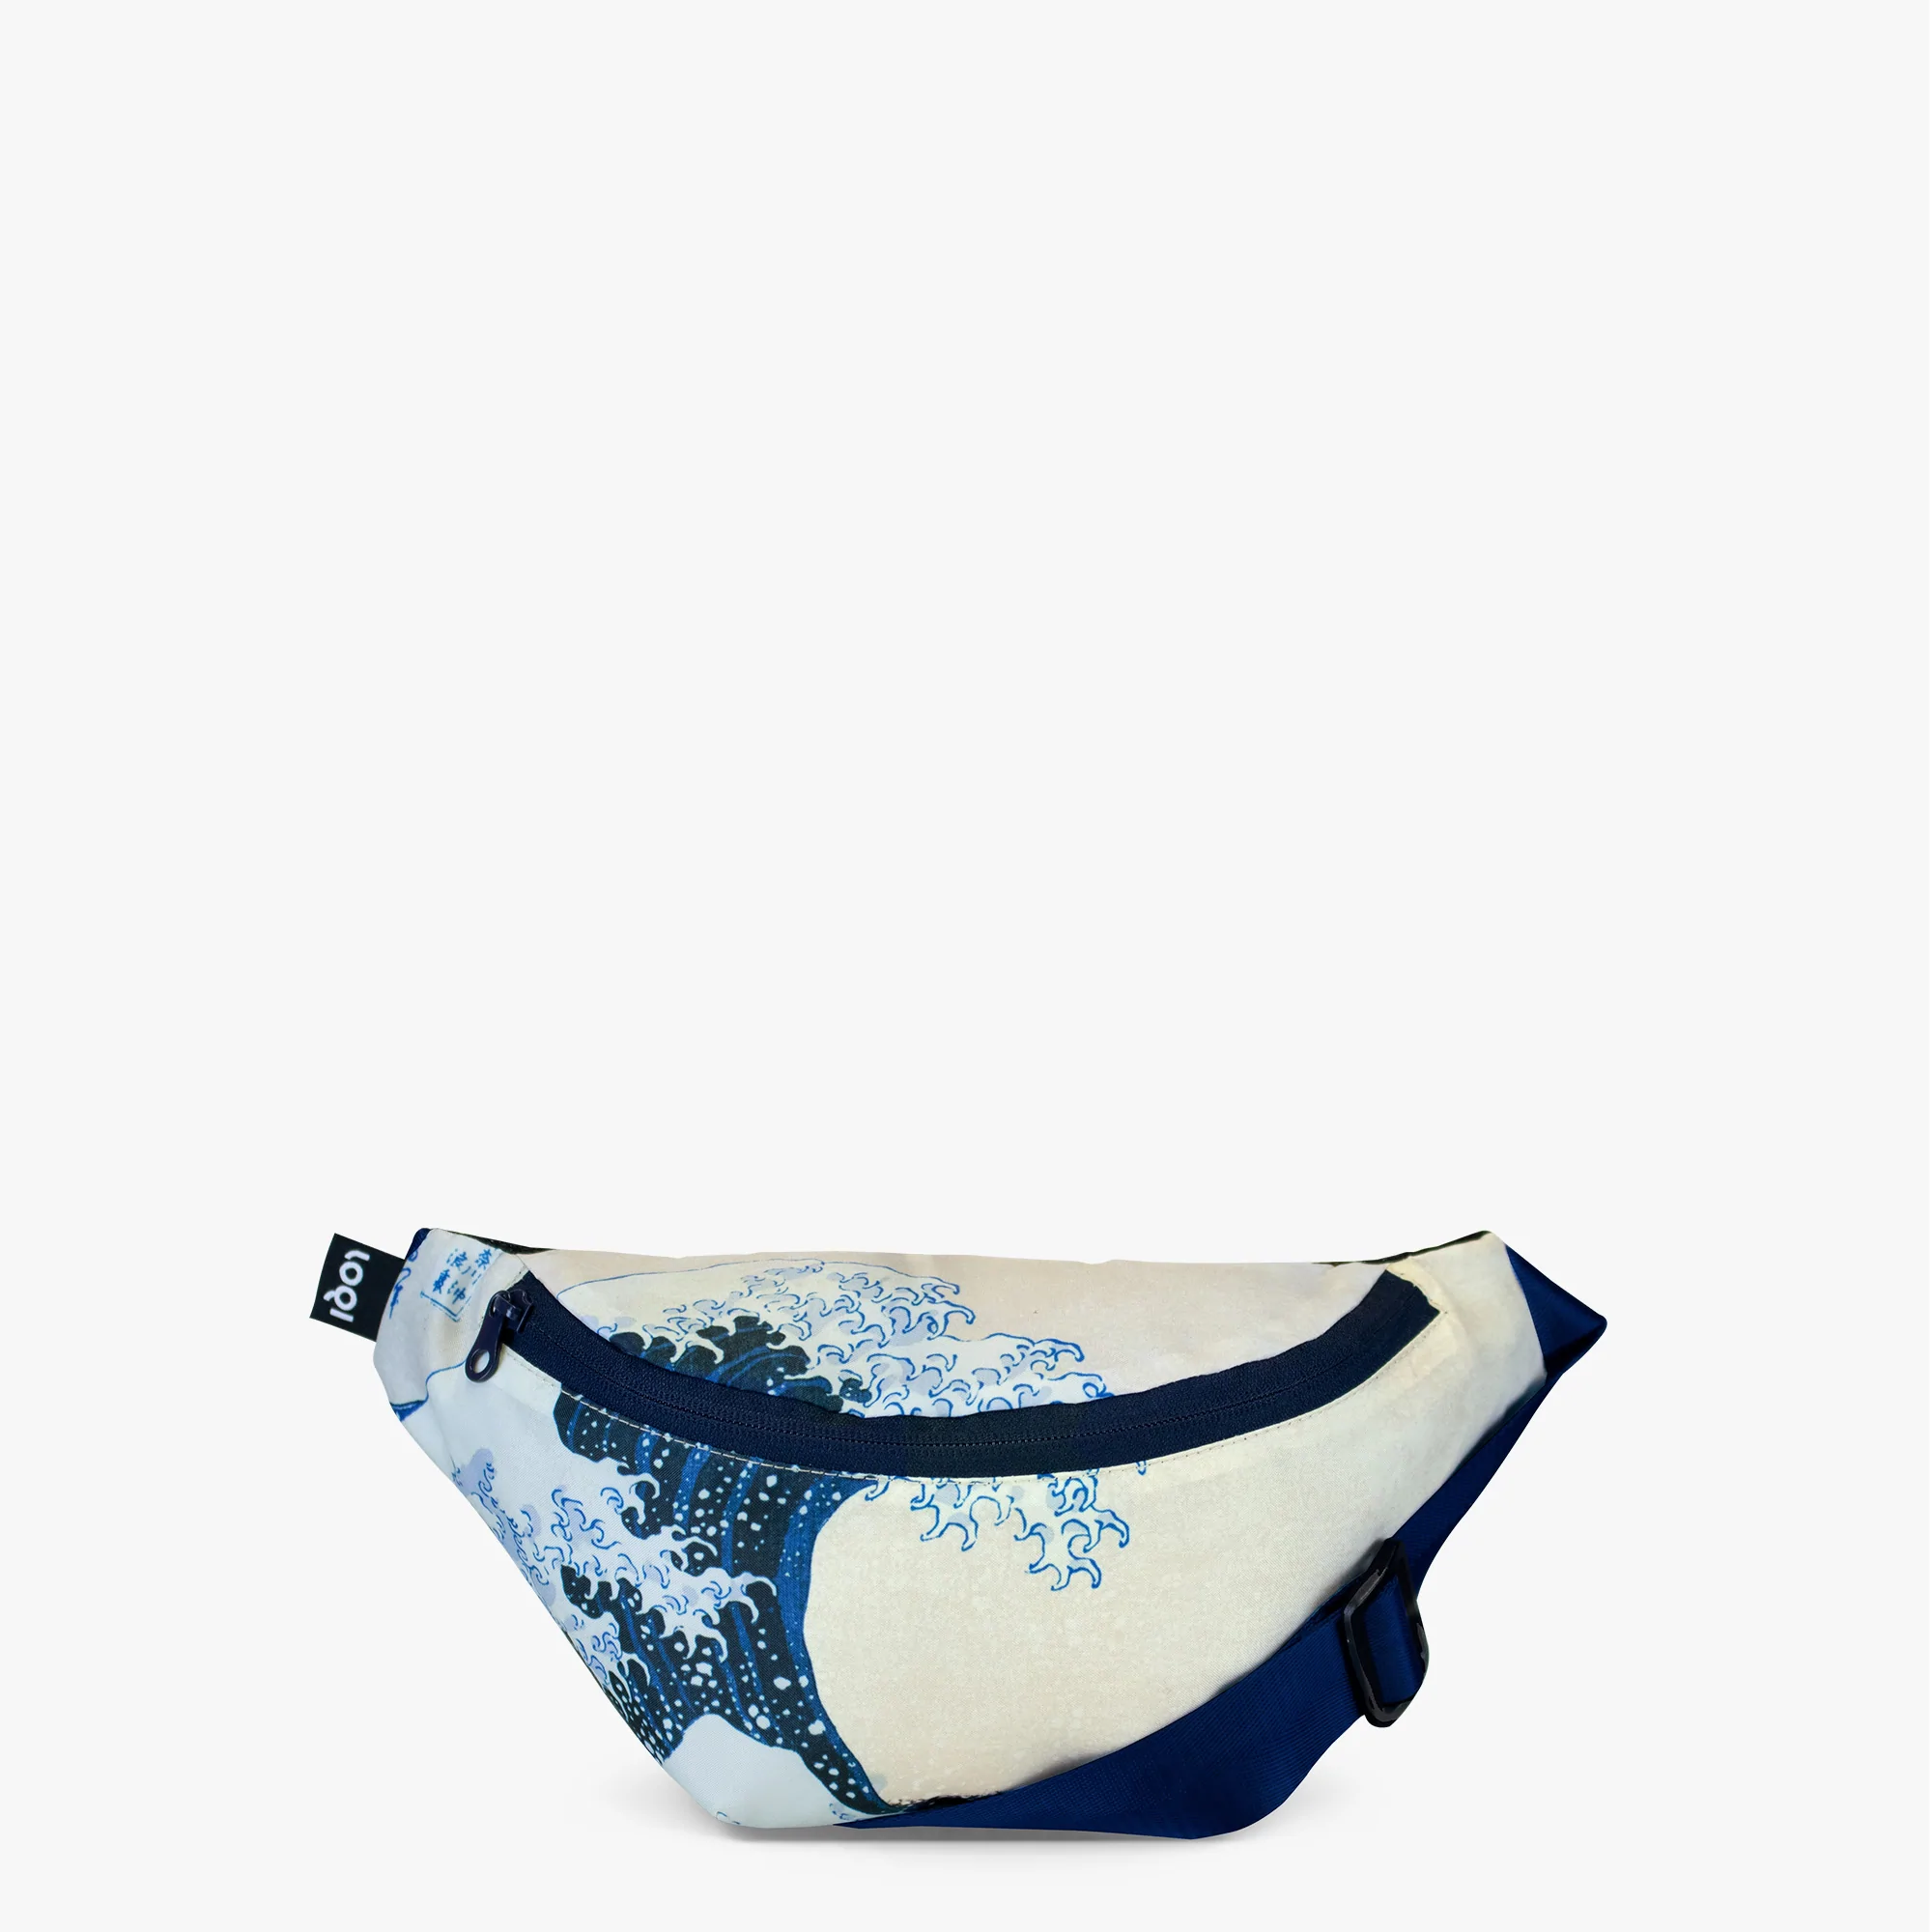 the great wave recycled bumbag by Loqi